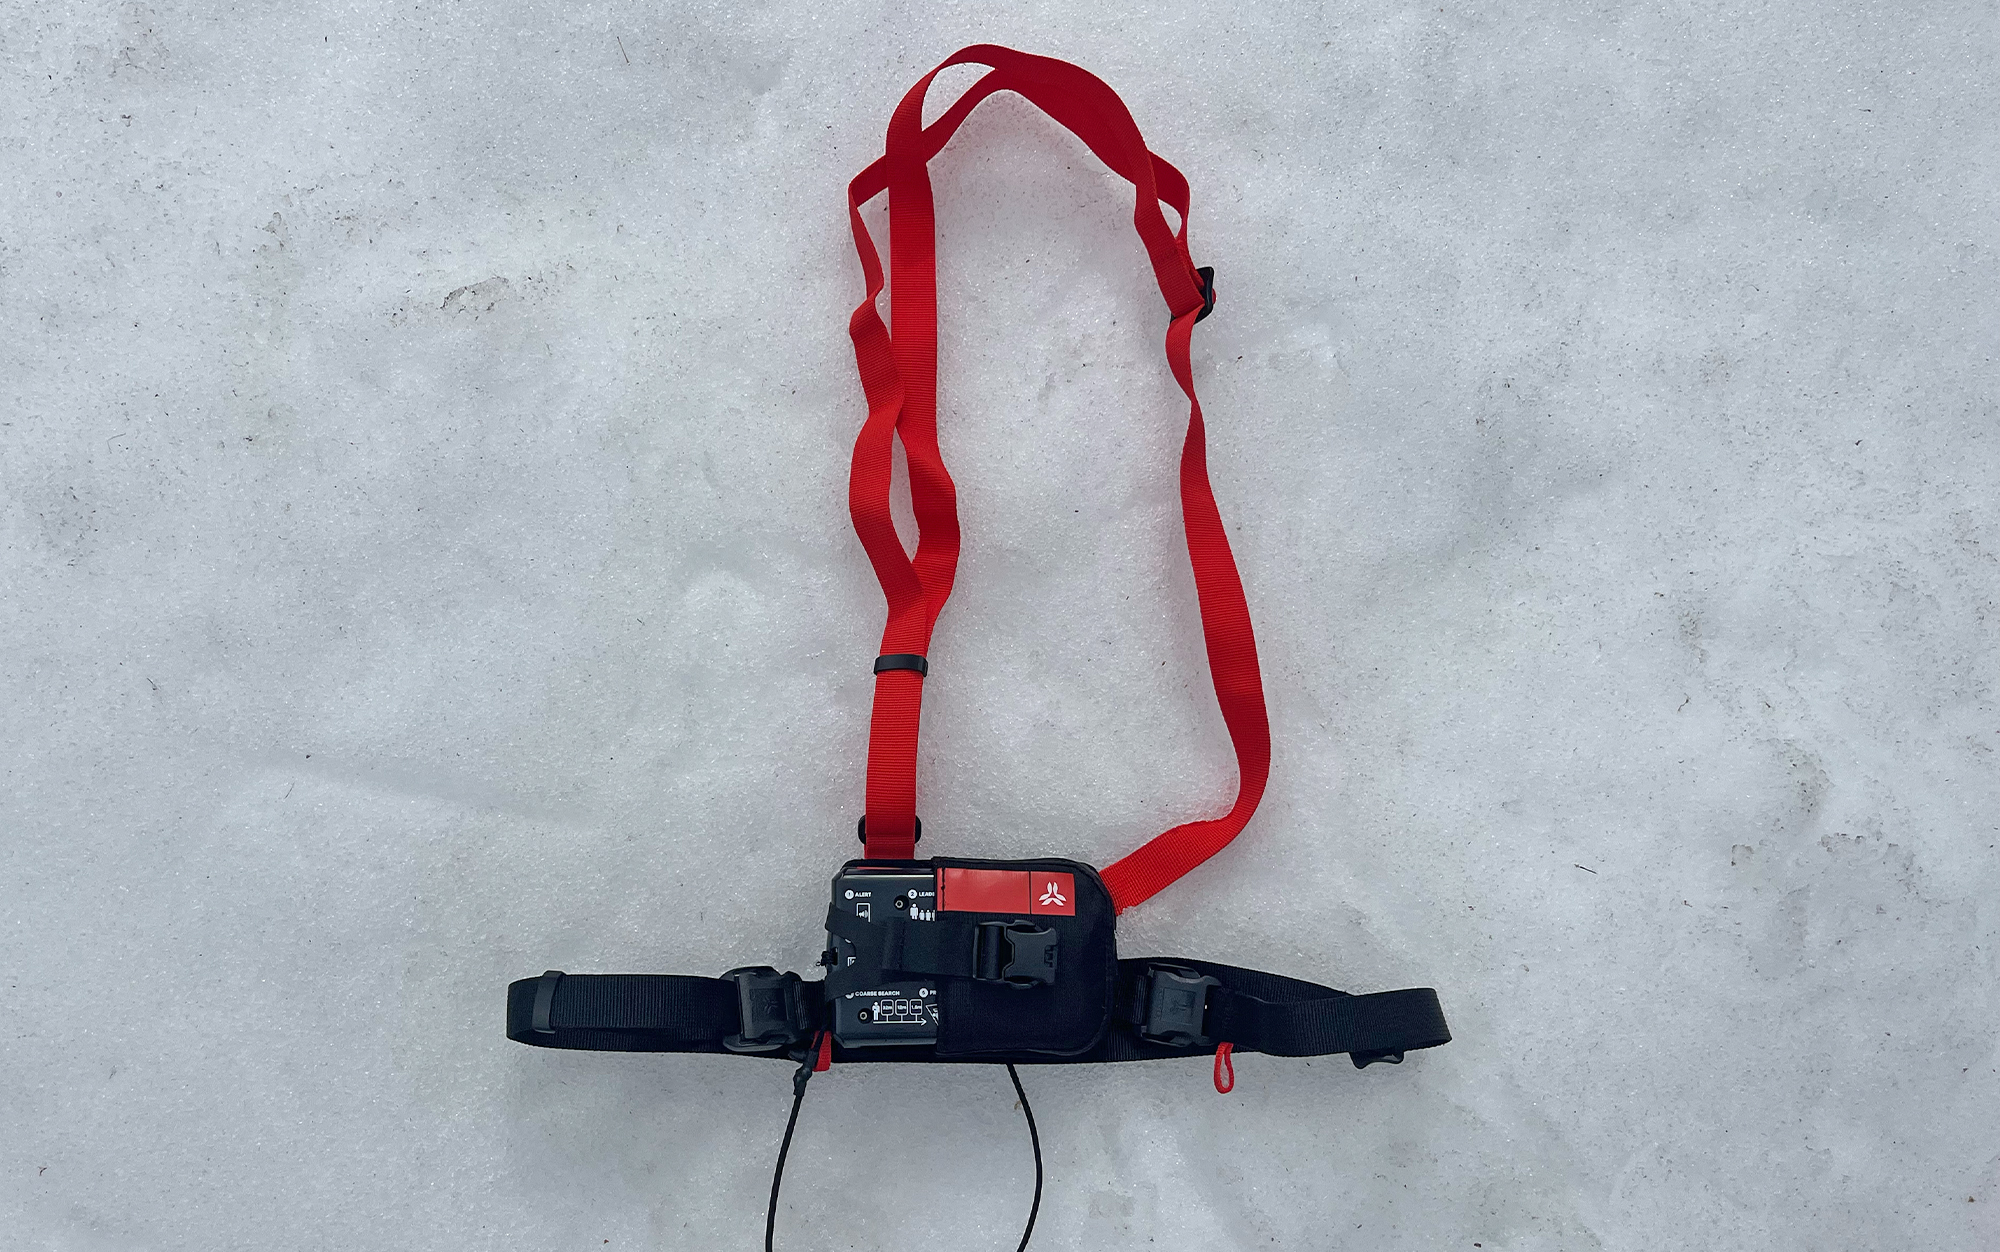 The Arva Neo BT Pro harness sits in the snow.